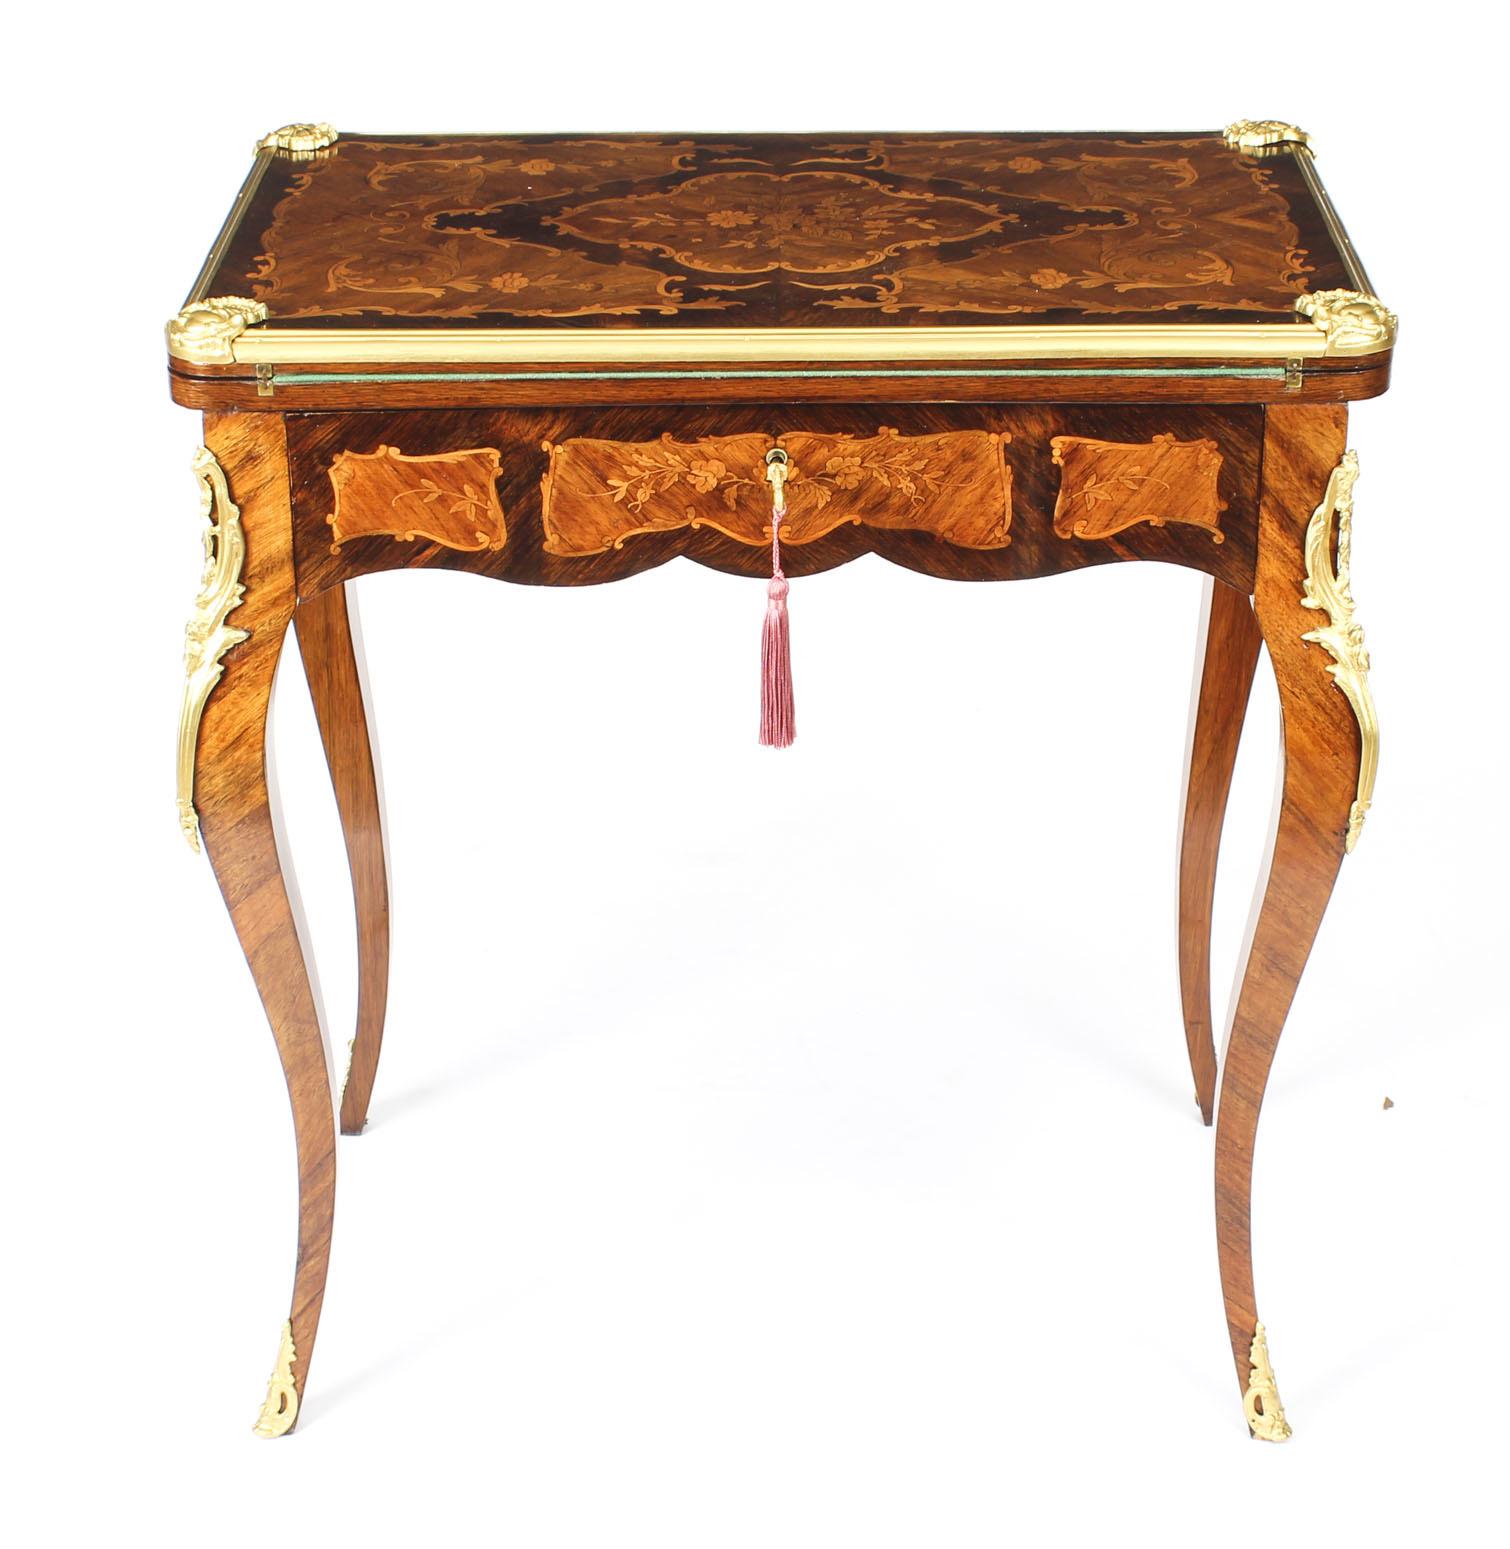 This is a rare late 19th century antique French ormolu mounted metamorphic burr walnut and floral marquetry card table, writing table and dressing table.

The shaped burr walnut top has walnut banding encompassing exquisite floral marquetry